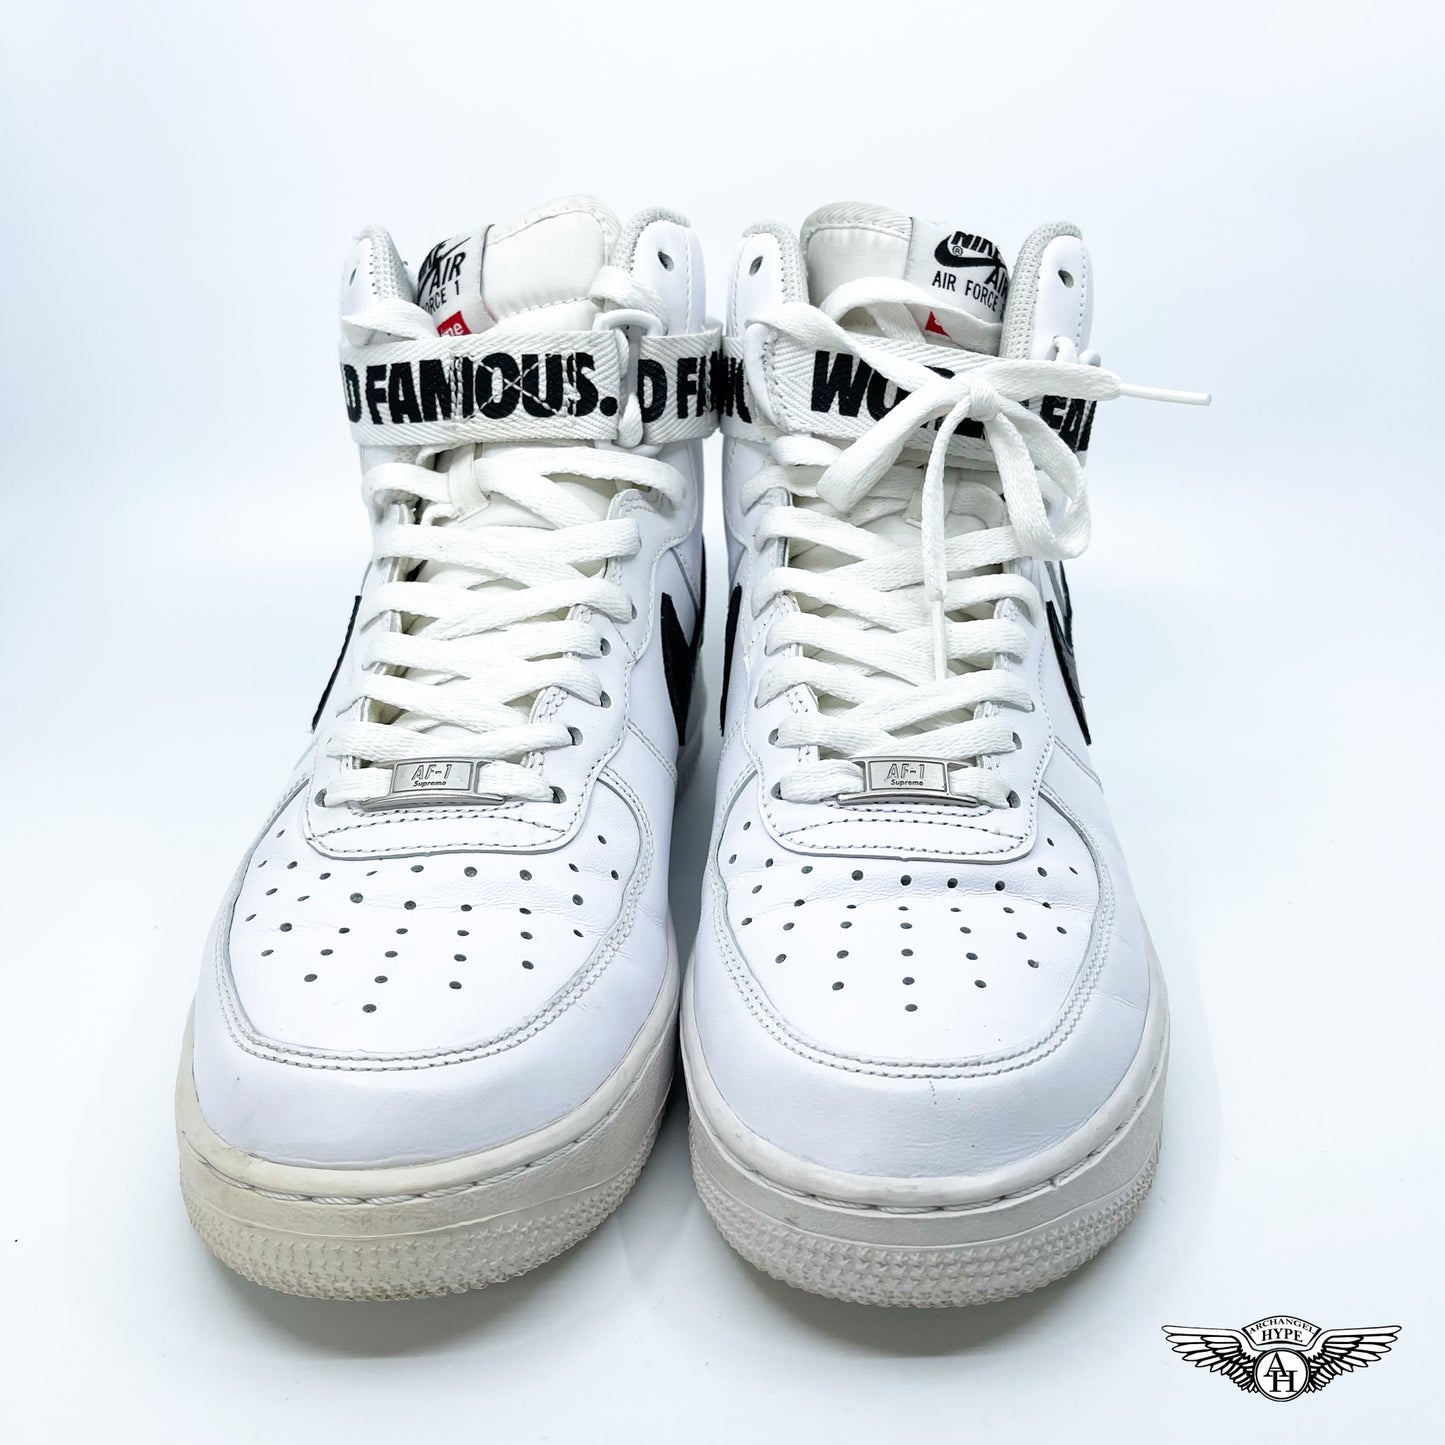 Nike Air Force 1 High Supreme World Famous White